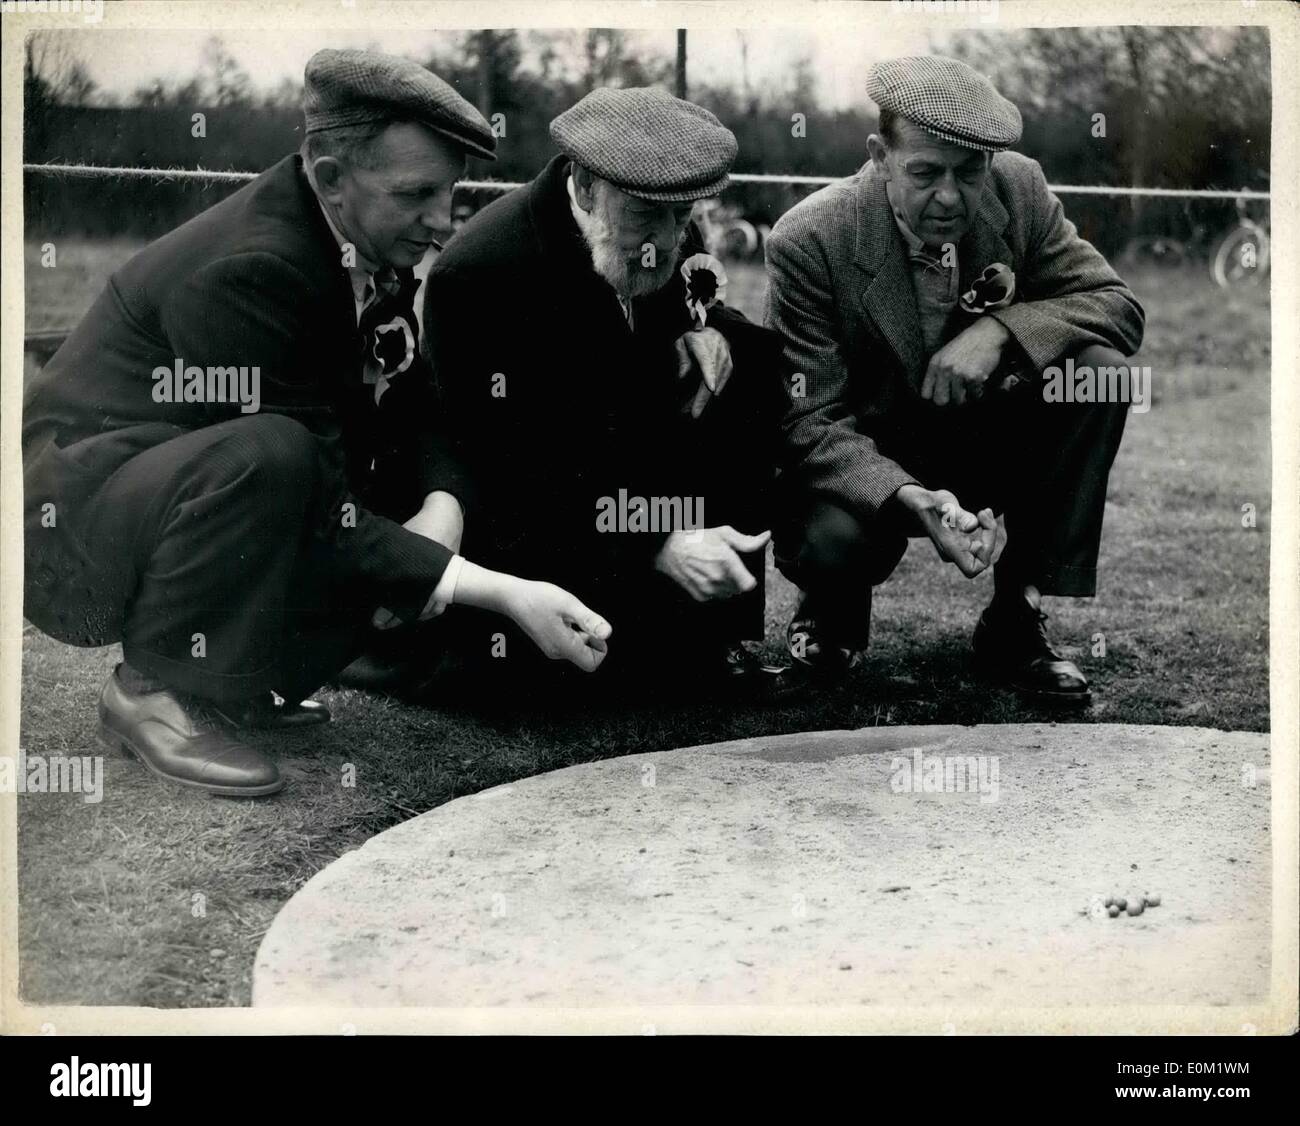 Apr. 04, 1953 - Annual Marbles championship at Tinsley Green... The annual good Friday marbles championships took place this morning at the village of Tinsley Green, on the Surrey-Sussex border. The contest goes back to Armada days when two village swains competed for the hand of a maiden in a game of marbles.... Photo shows:- Left to right:- George Maynard, aged 50: Pop Maynard, aged 81: and Arthur Maynard. aged 52, who are members of the Coptherne Spitfire seen in action during the match this morning. Stock Photo